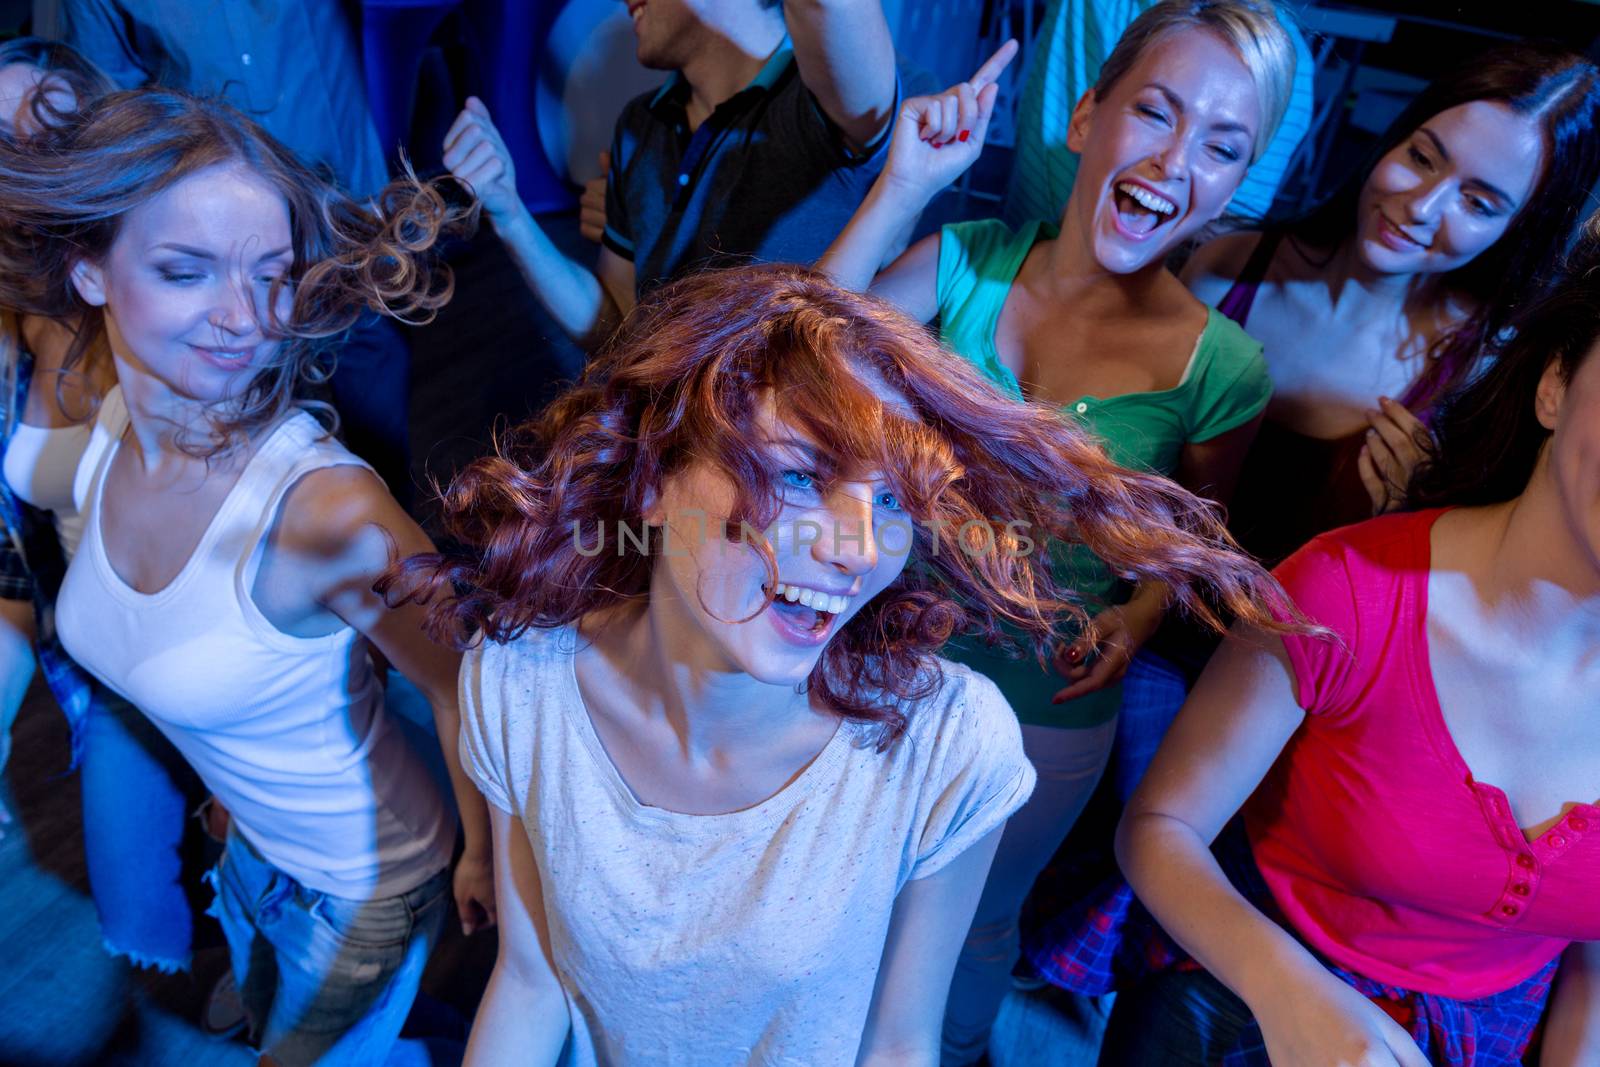 party, holidays, celebration, nightlife and people concept - smiling friends dancing in club